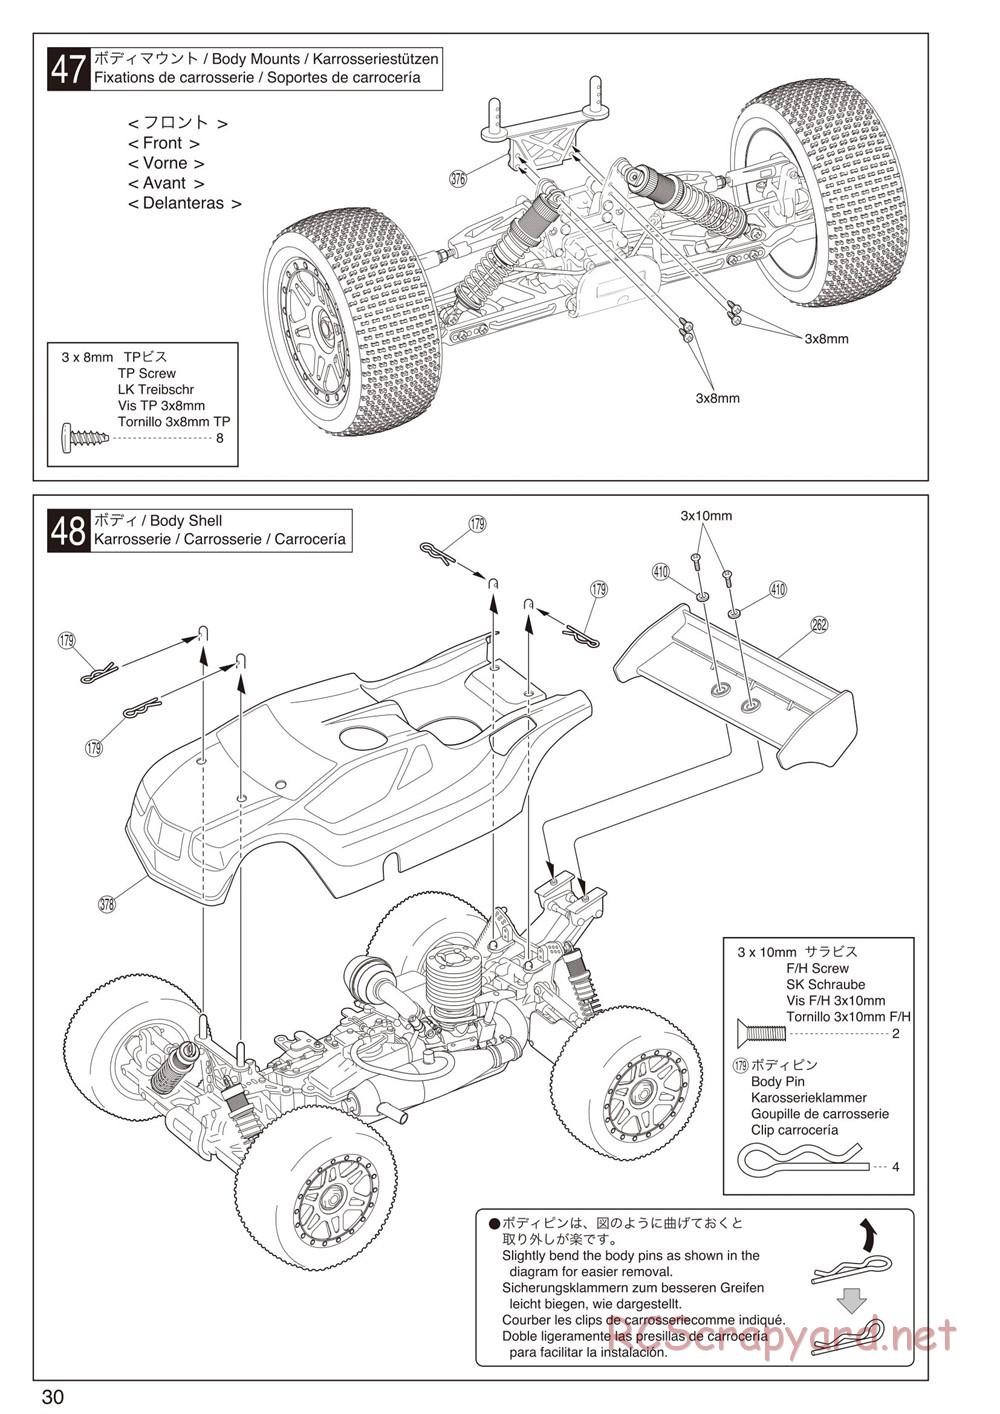 Kyosho - Inferno Neo ST - Manual - Page 30